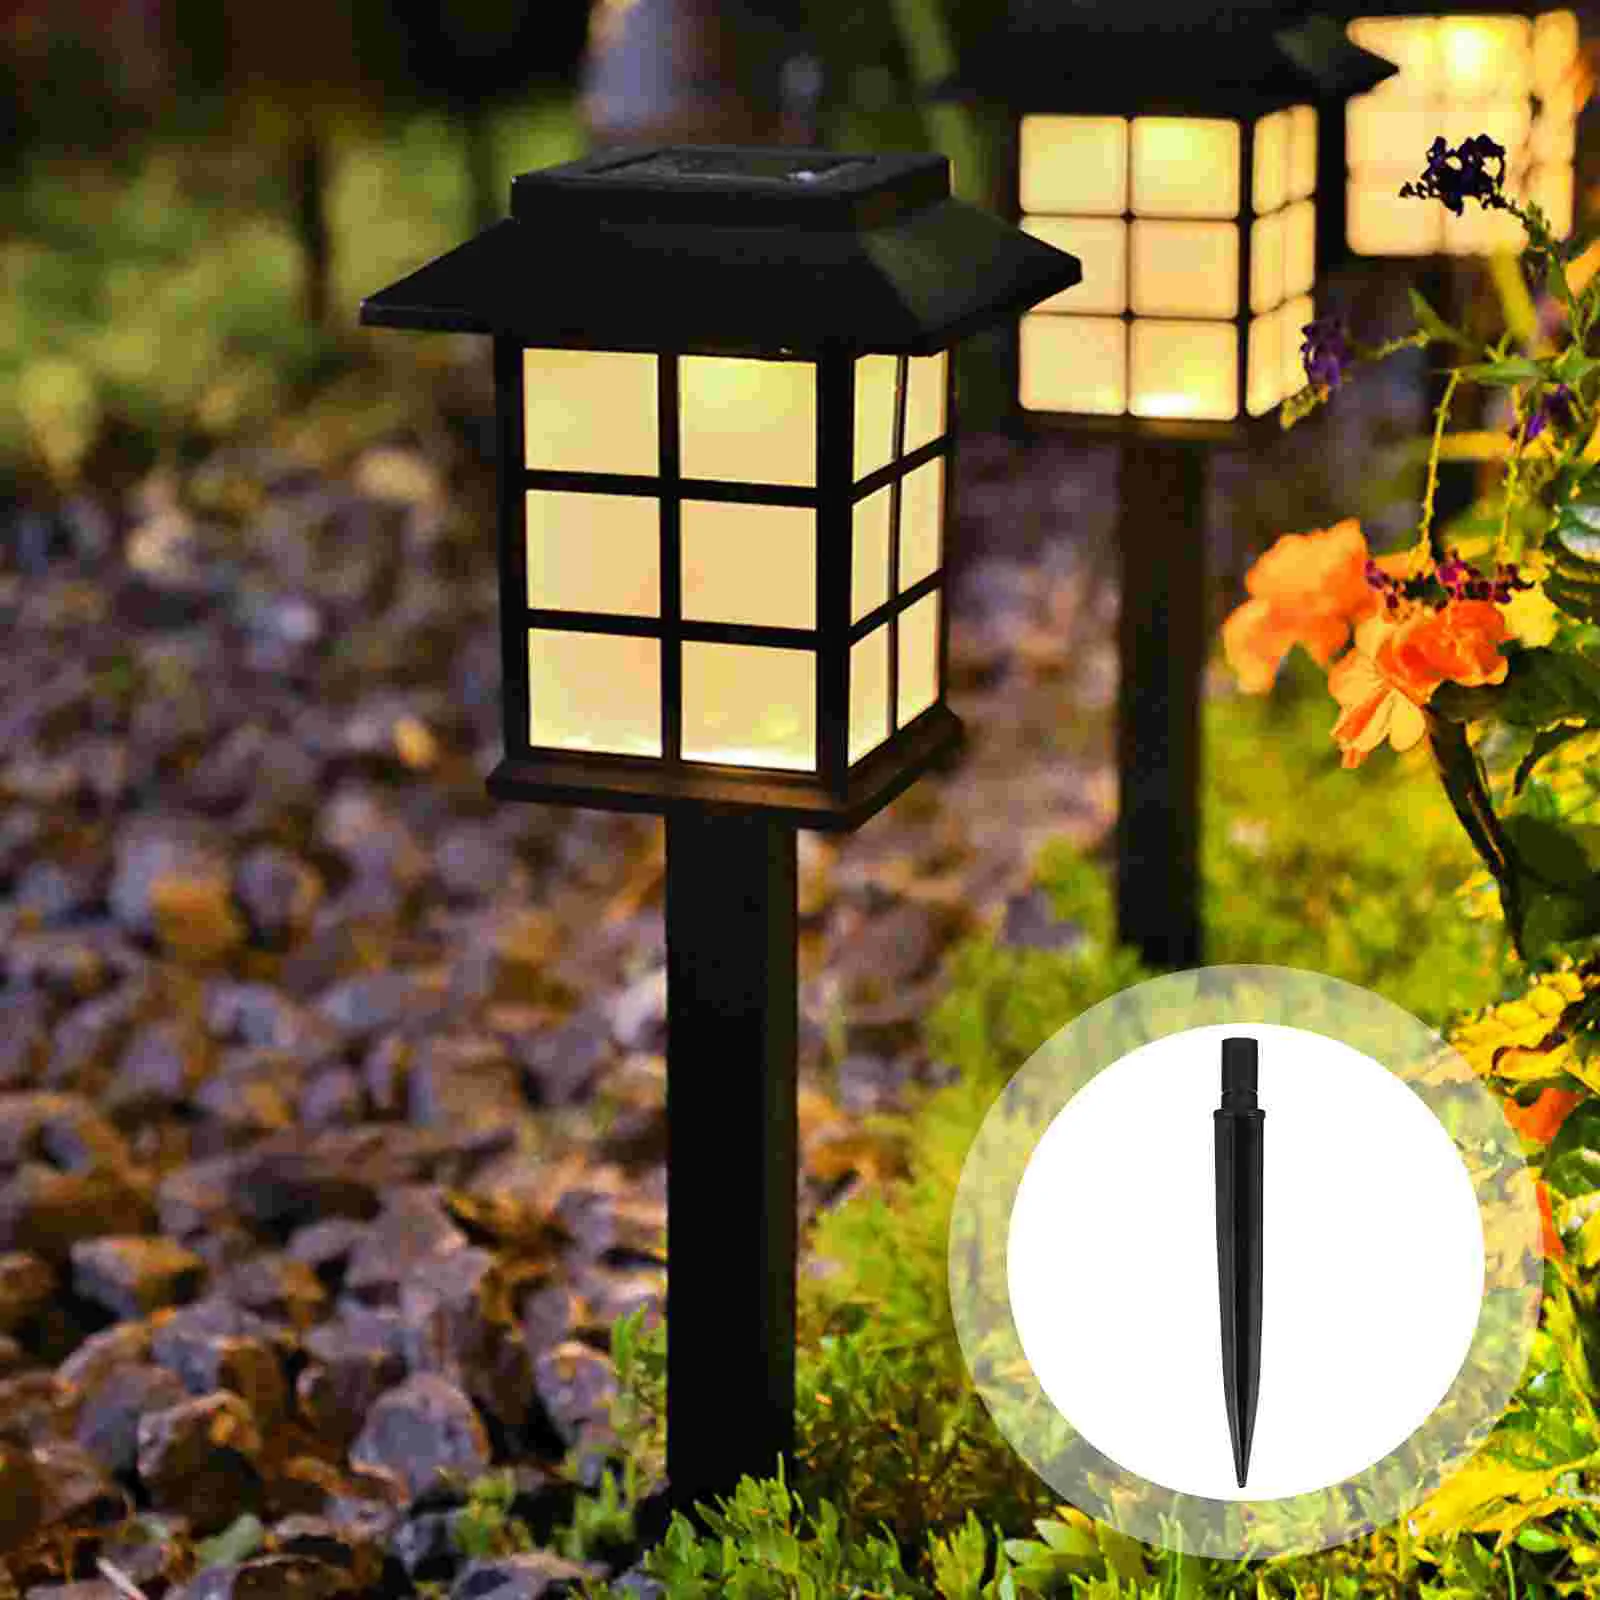 

Lights Stakes Spikes Light Ground Solar Replacement Spike Plastic Garden Pathway Stake Torch Lawn Lamp Landscape Outdoor Yard